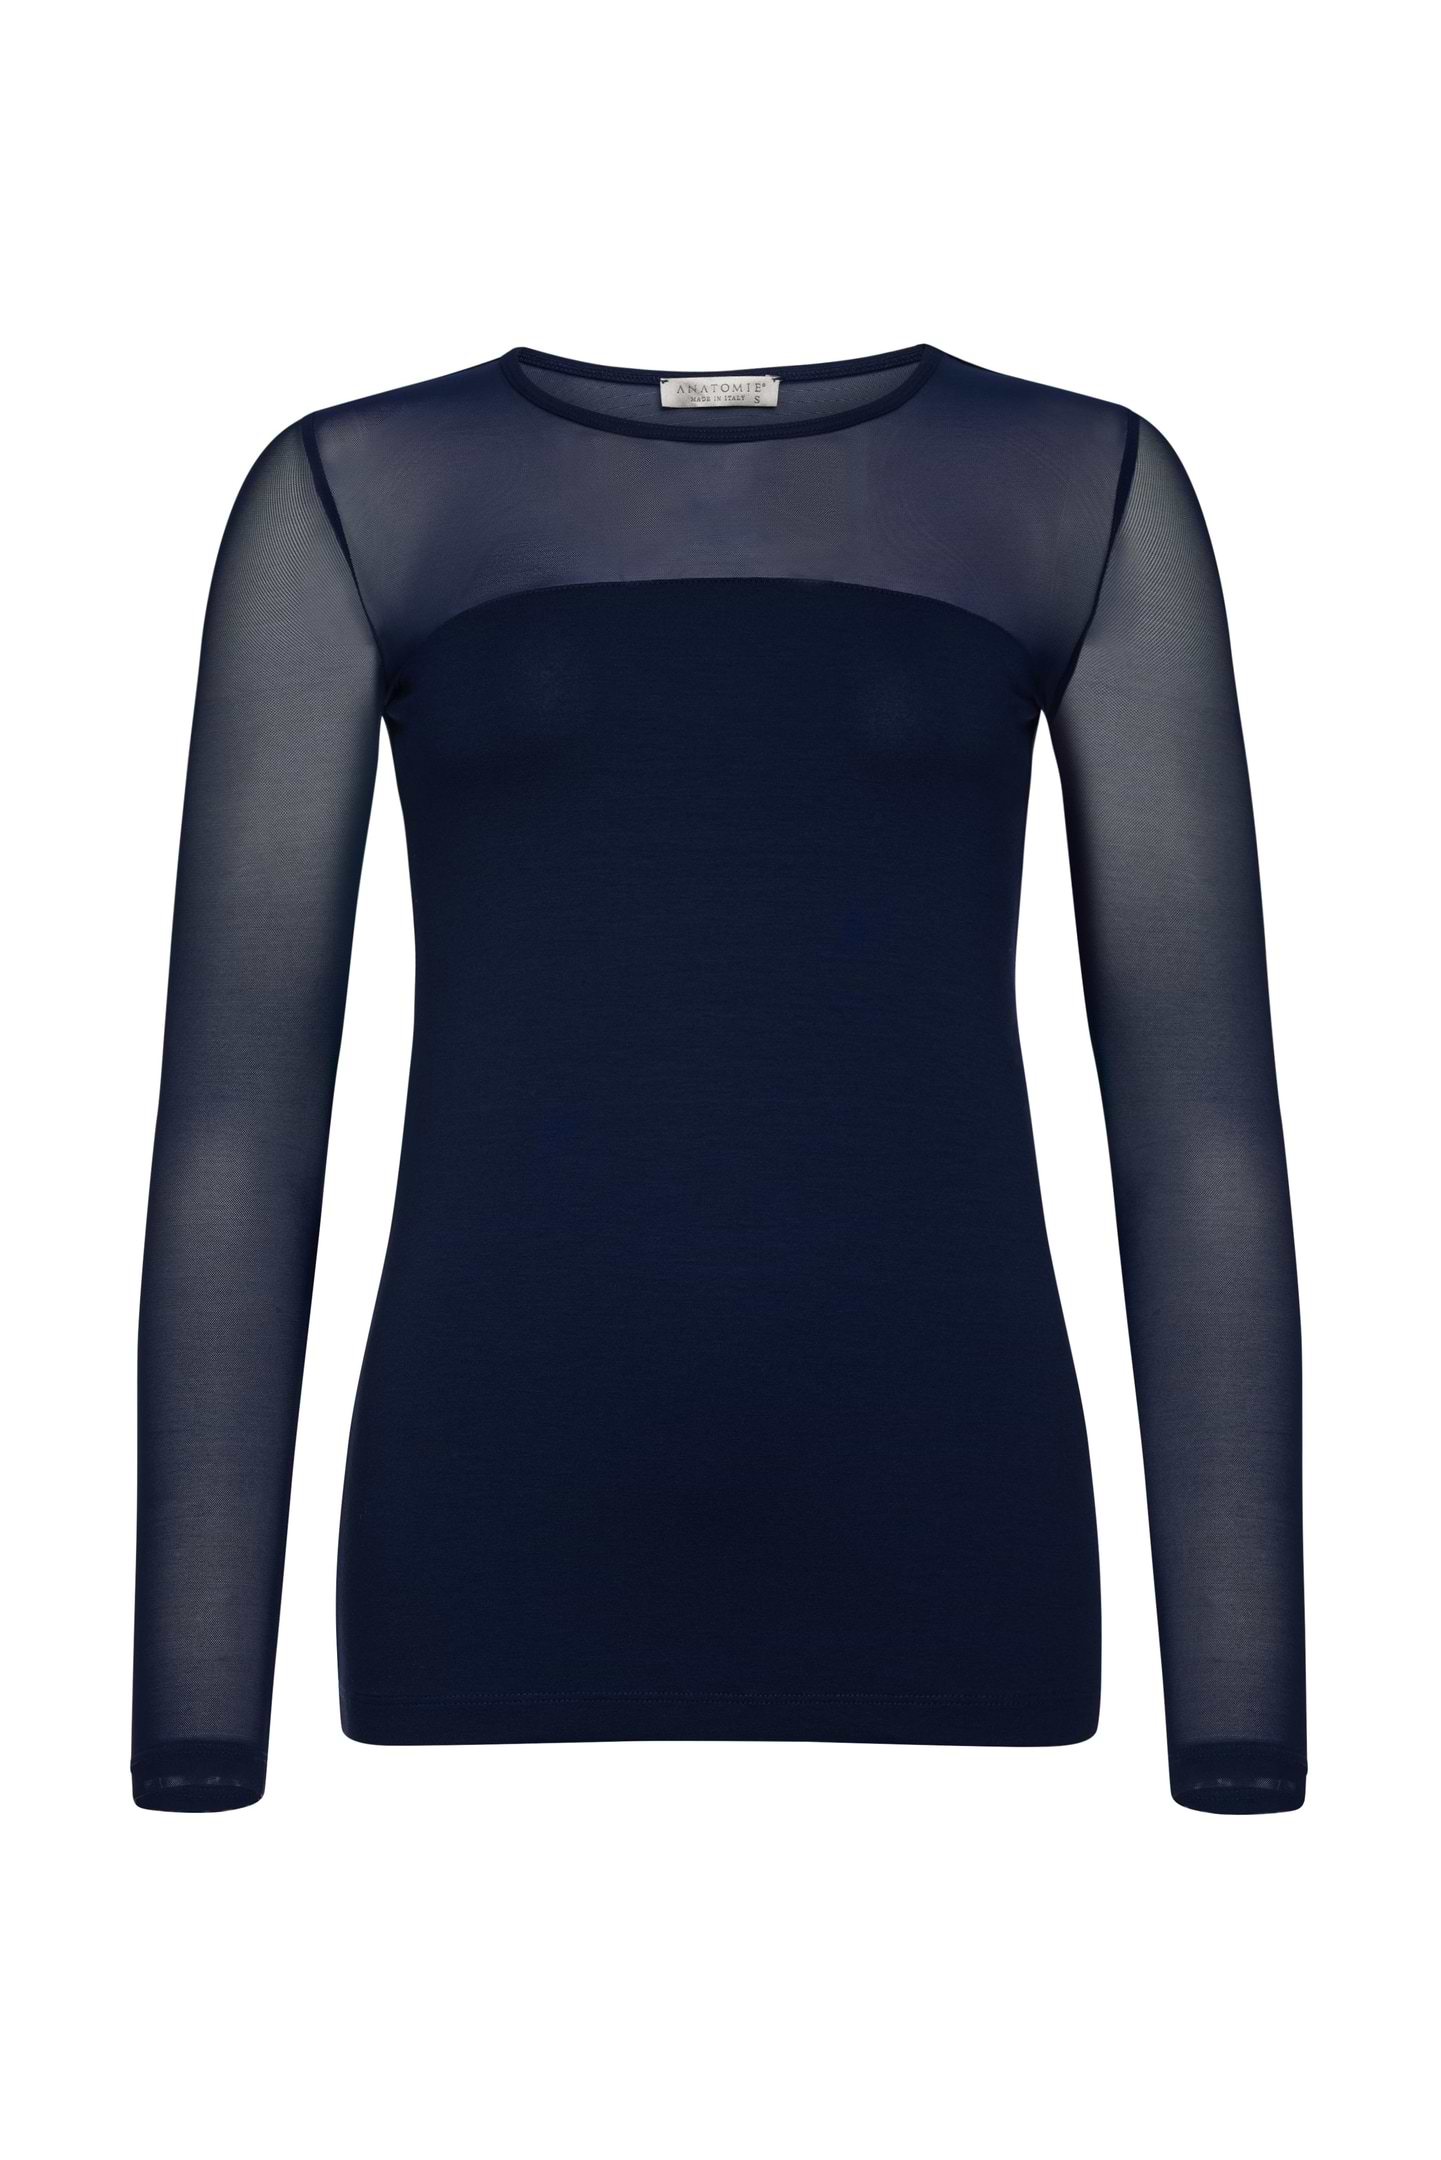 Long Sleeve Mesh Top, Softshell Clothes